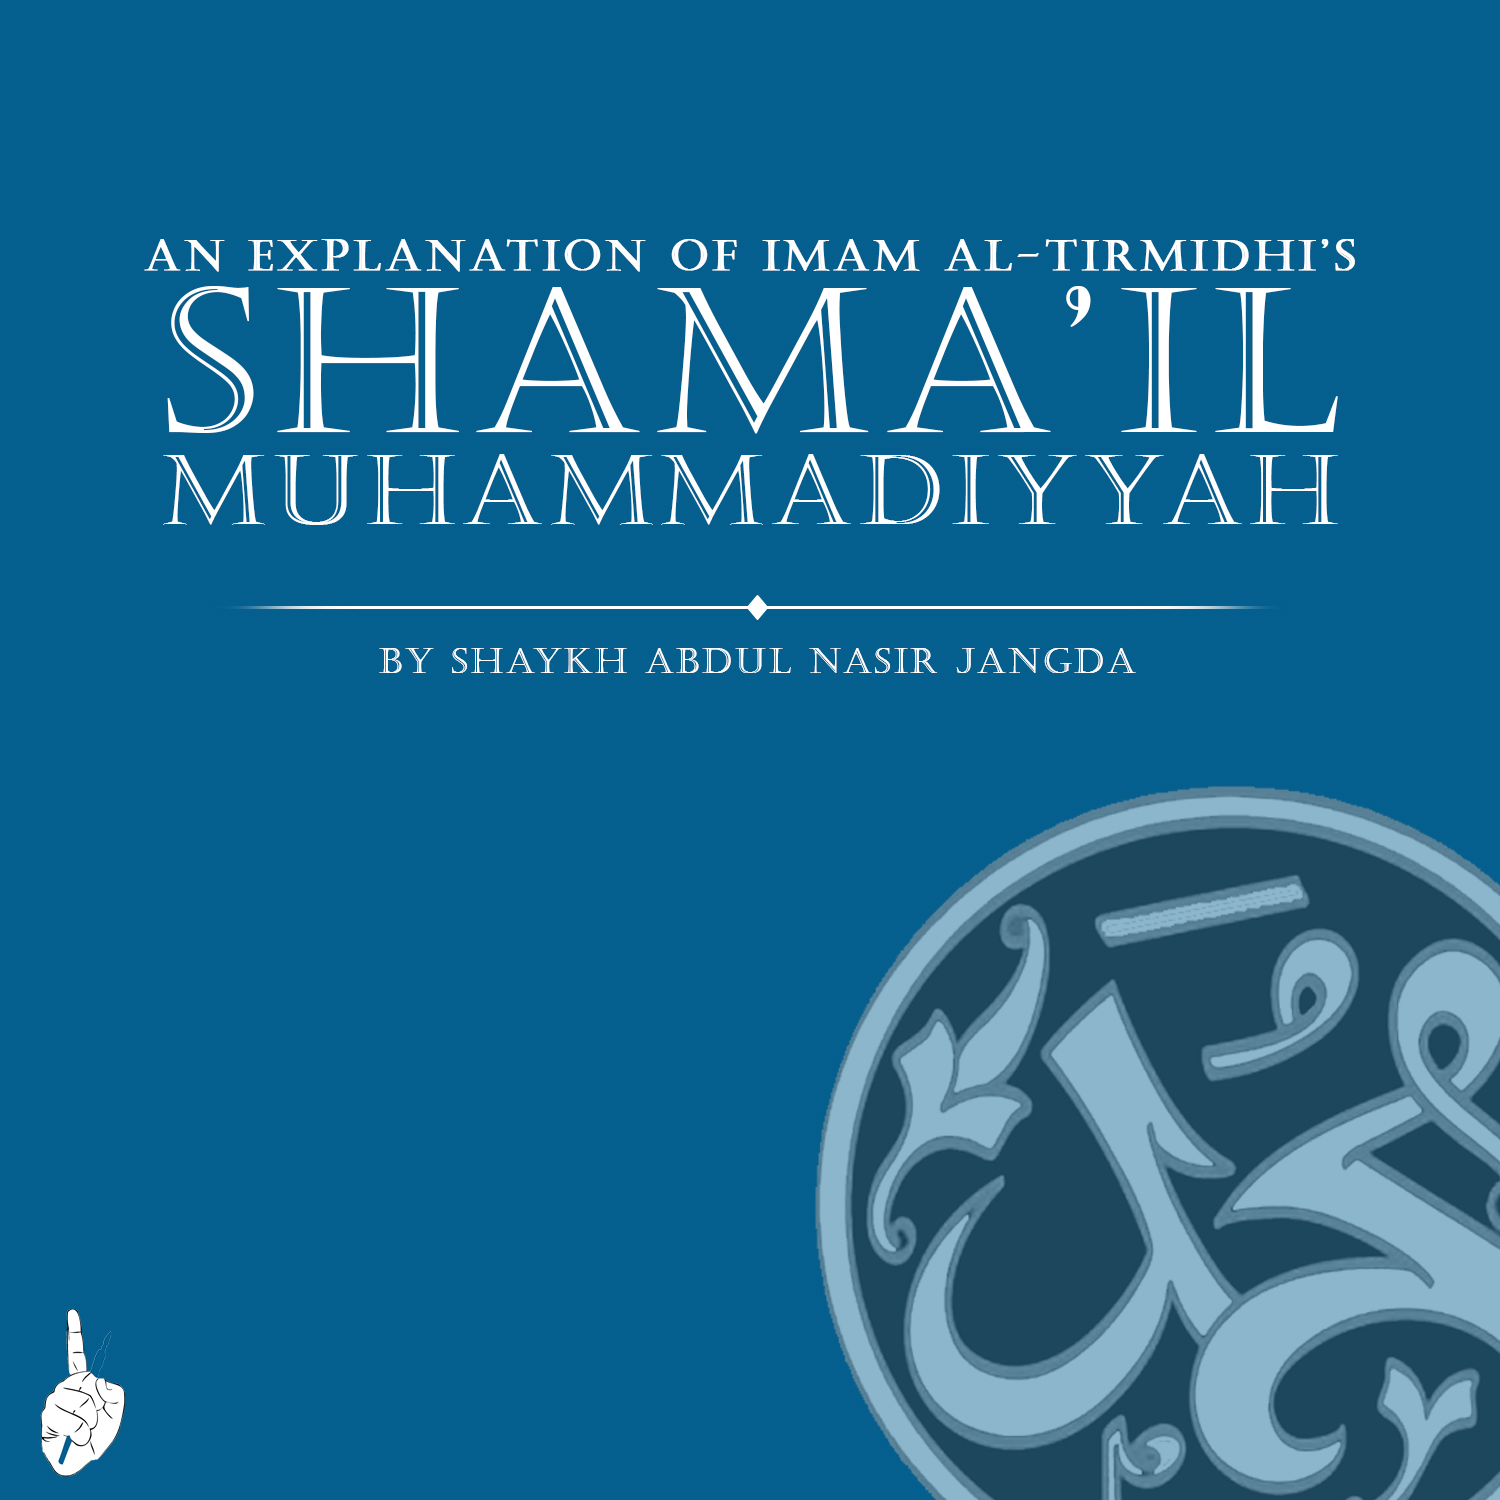 Shama’il Muhammadiyyah: EP3 – The Physical Features of the Prophet Part 3